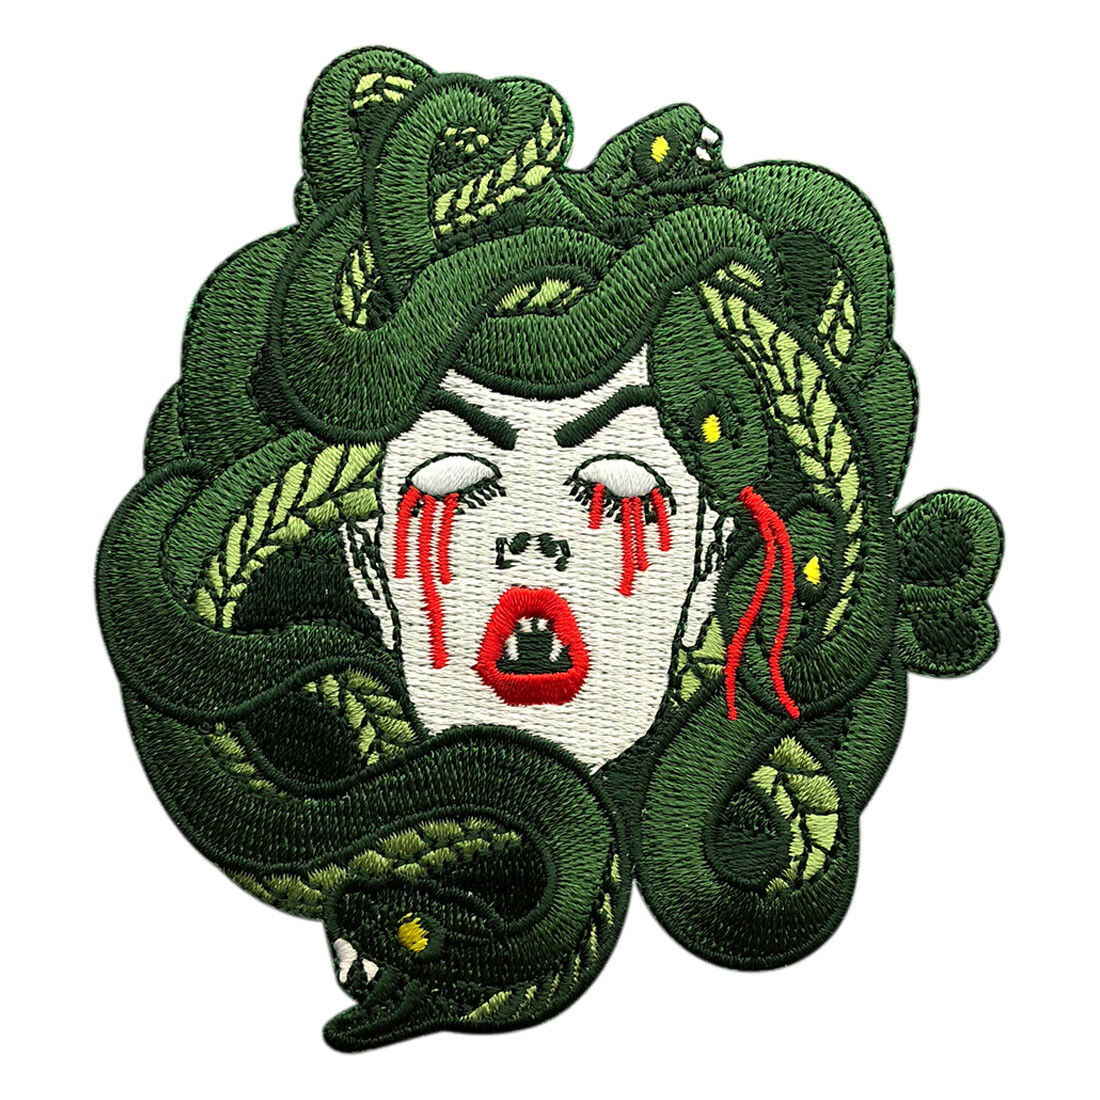 Medusa Embroidered iron on Sew on 4.0 inch Patch 